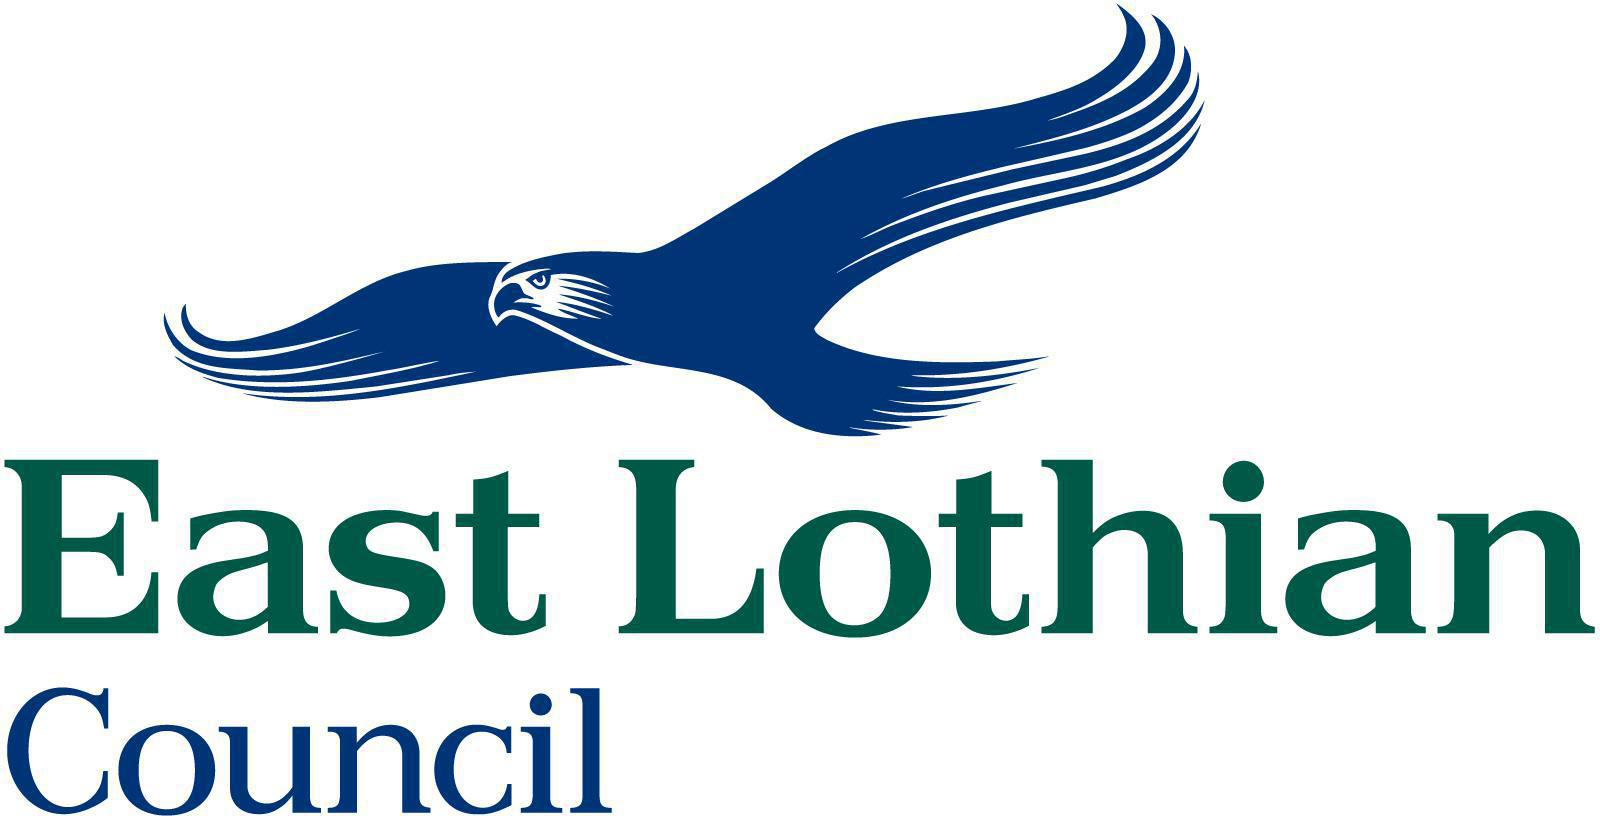 East Lothian Council continues to reduce its carbon footprint